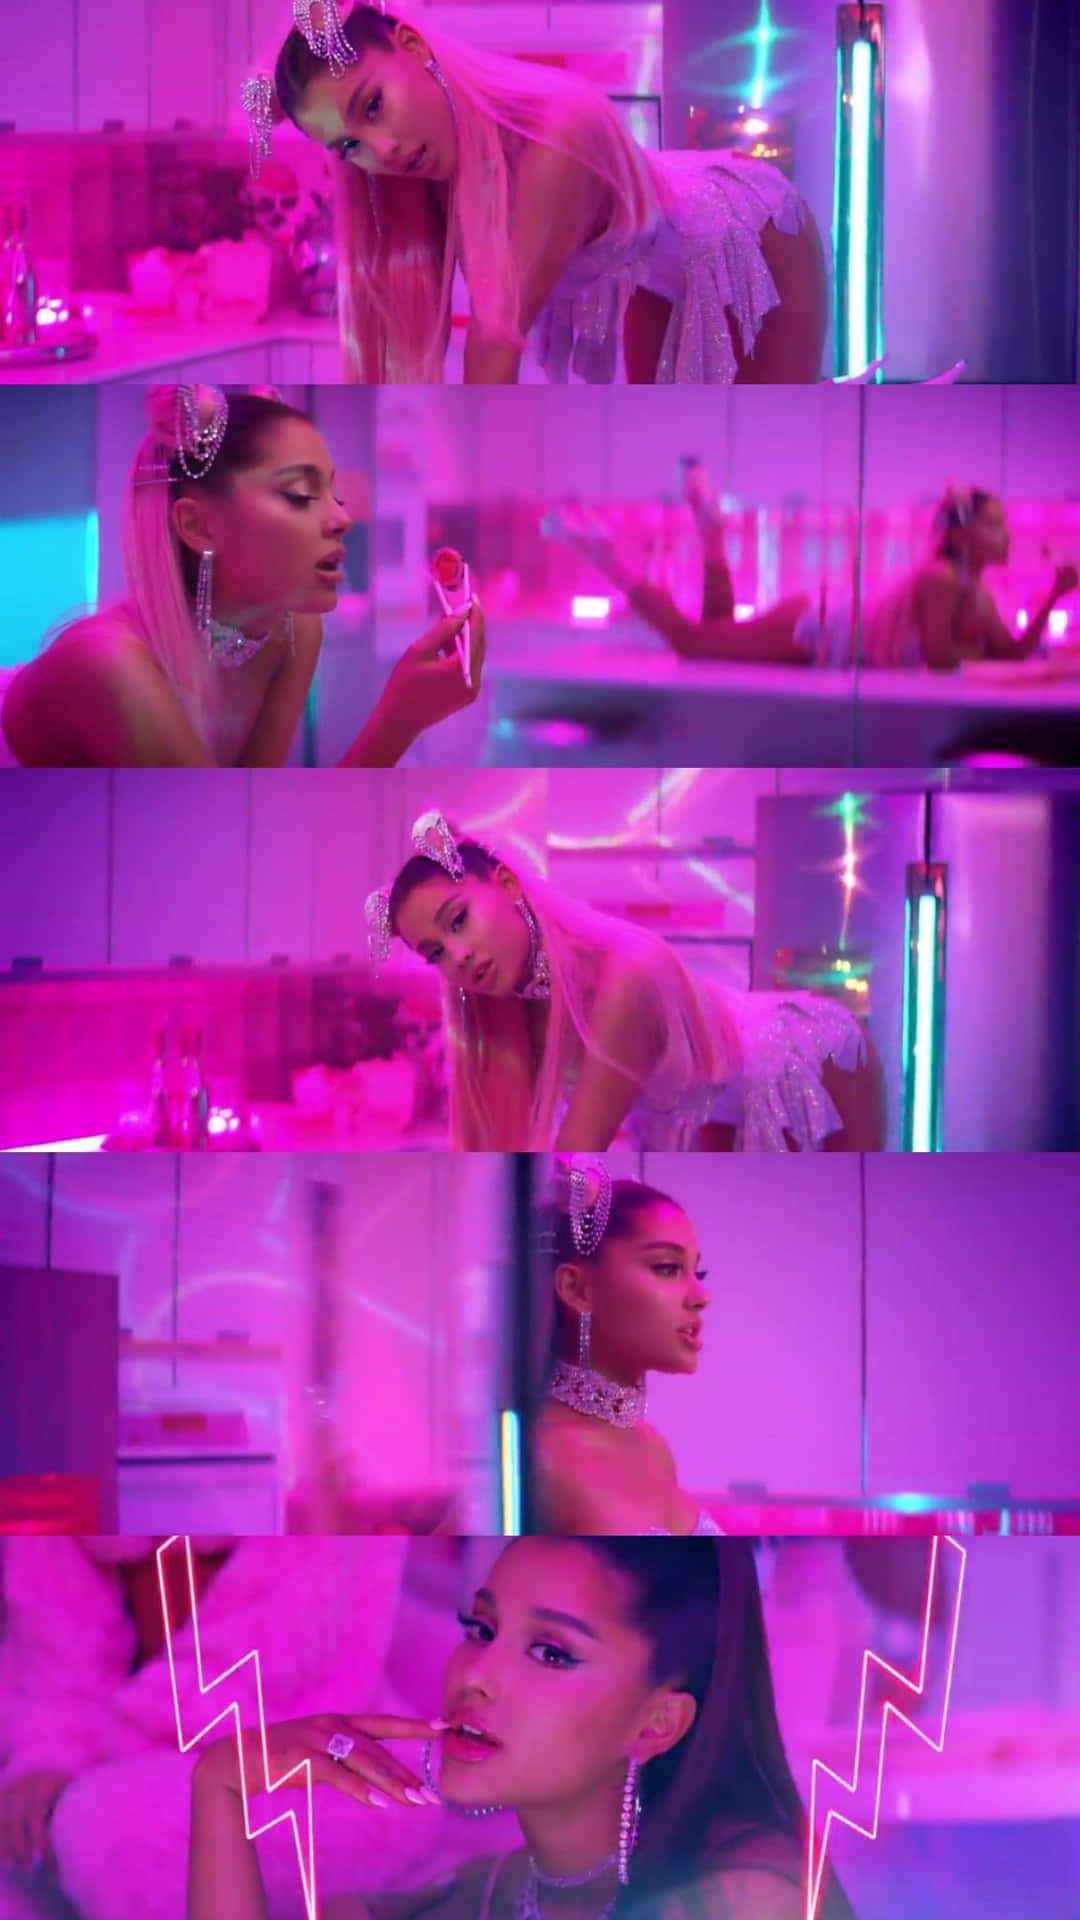 Get Rings Ready with Ariana Grande's #7Rings Wallpaper